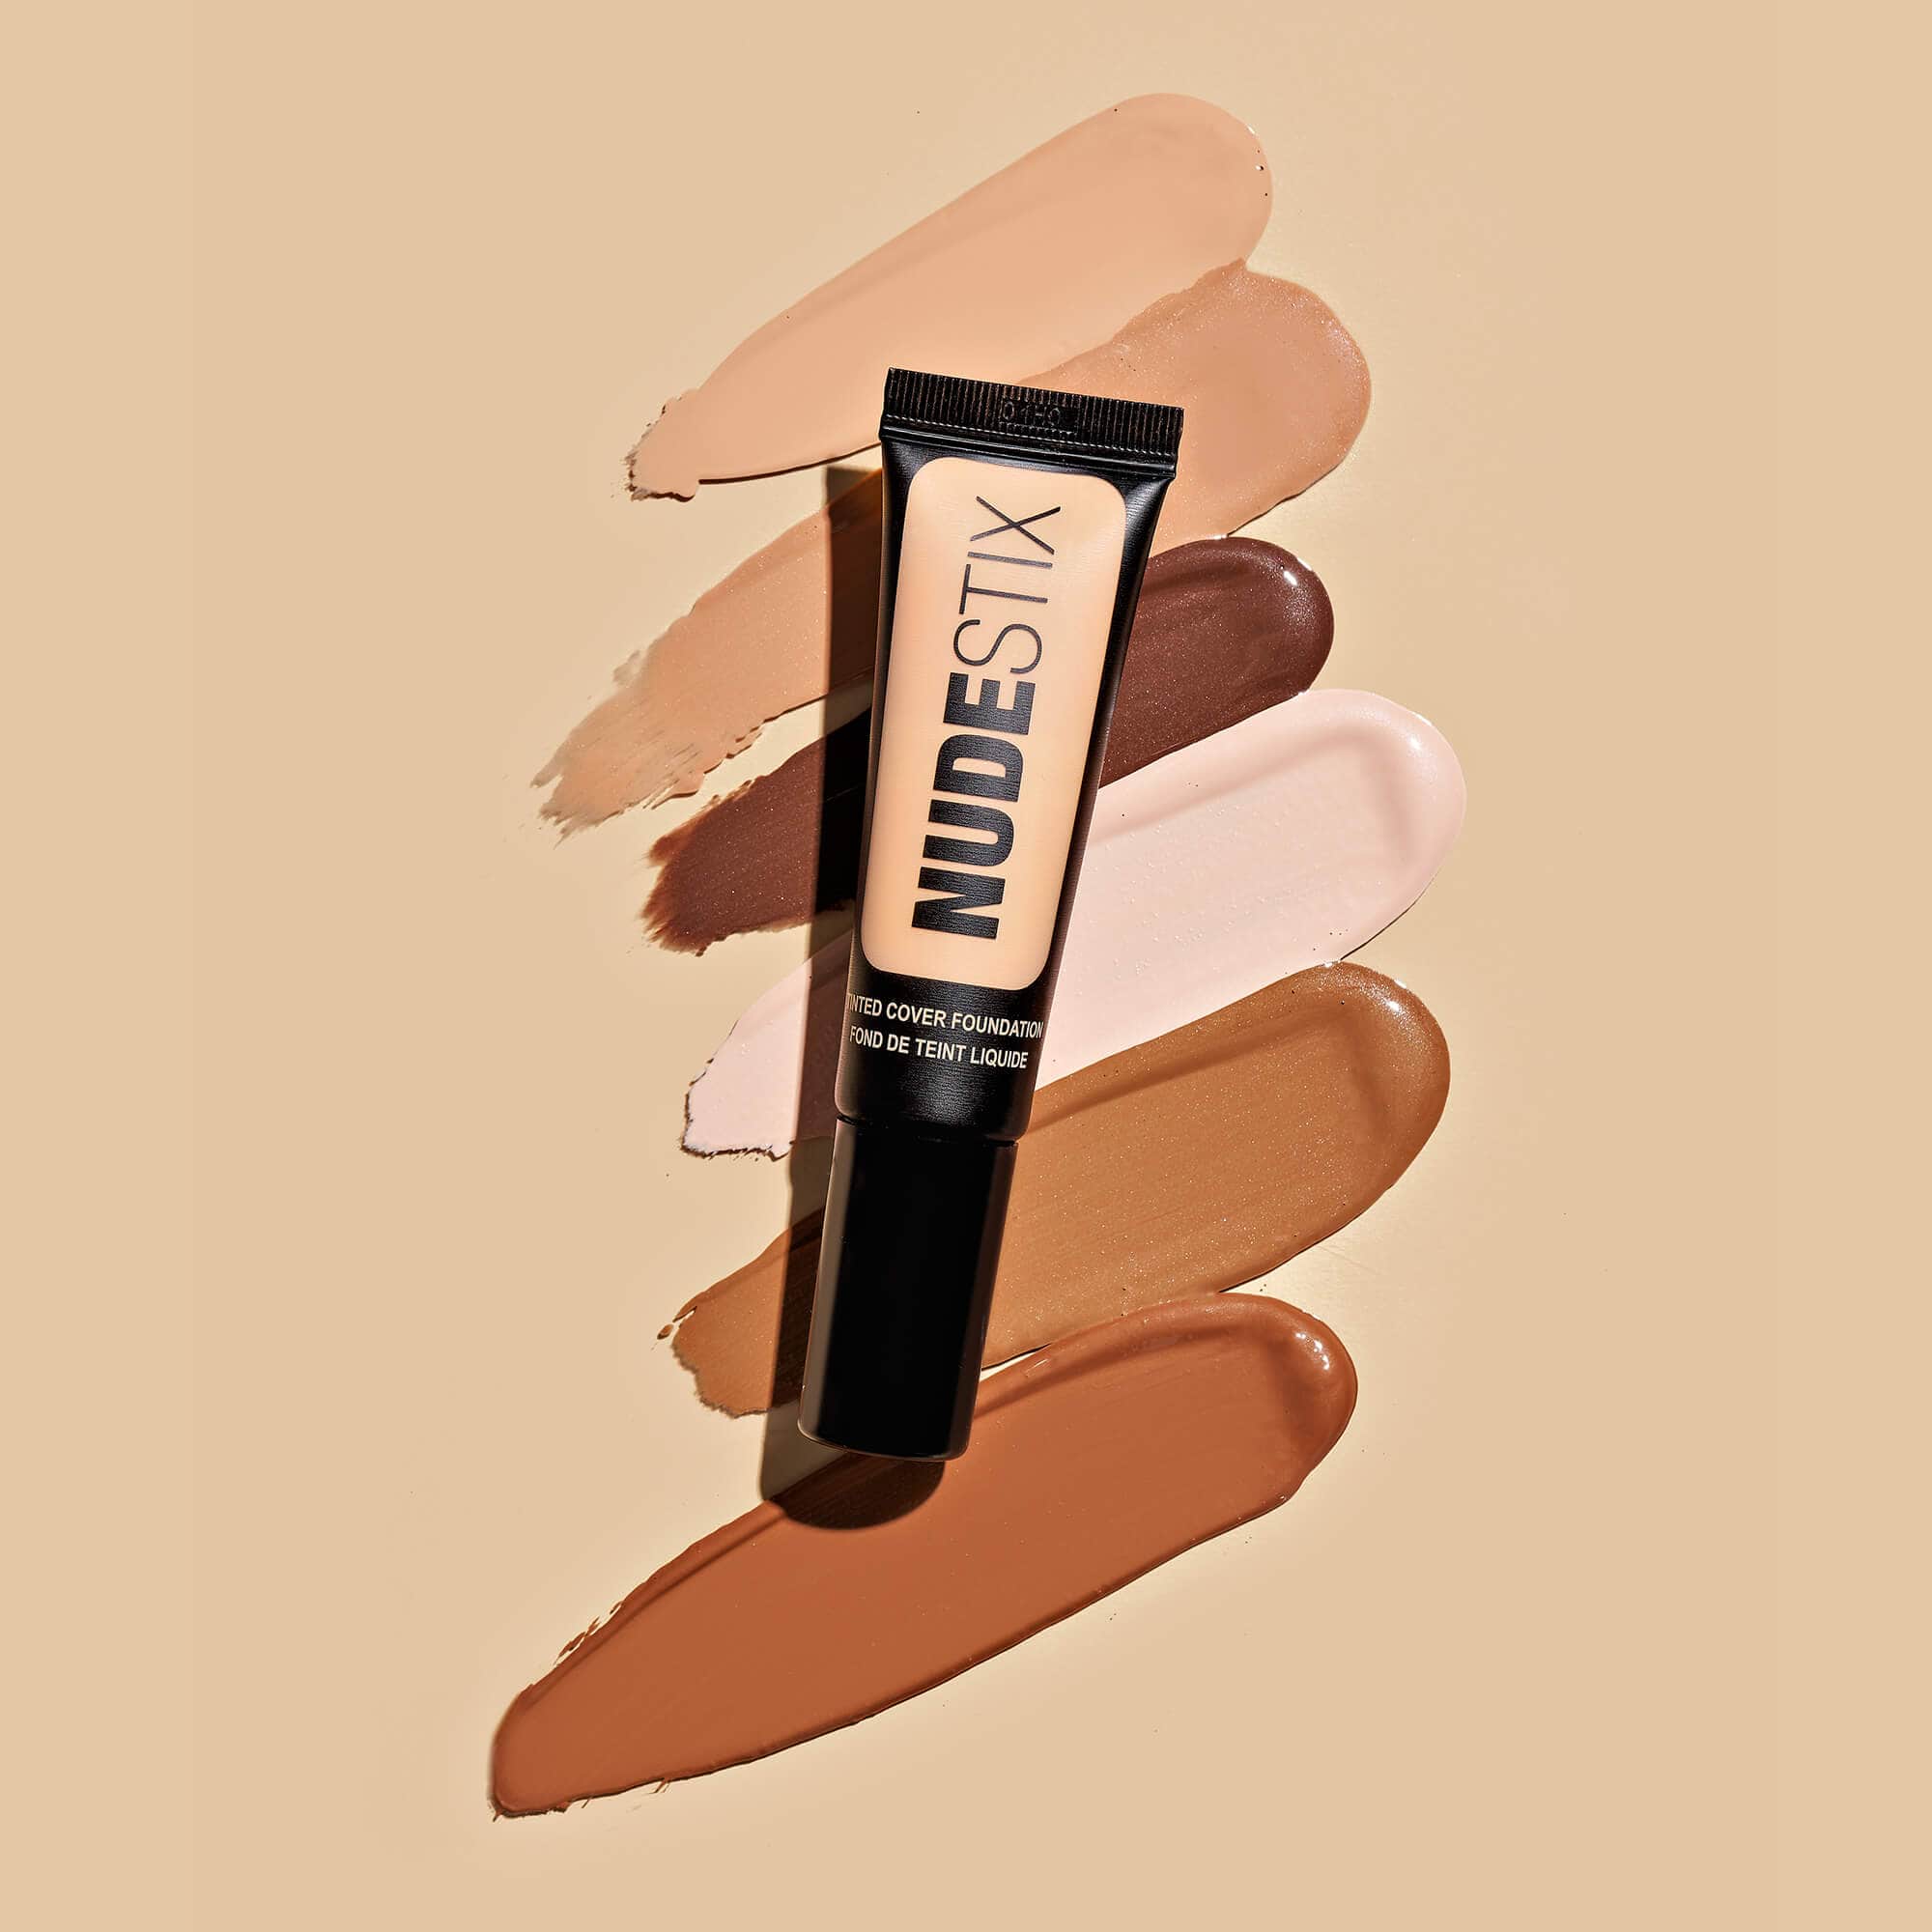 Tinted Cover Liquid Foundation in shade Nude 1 with texture swatches behind